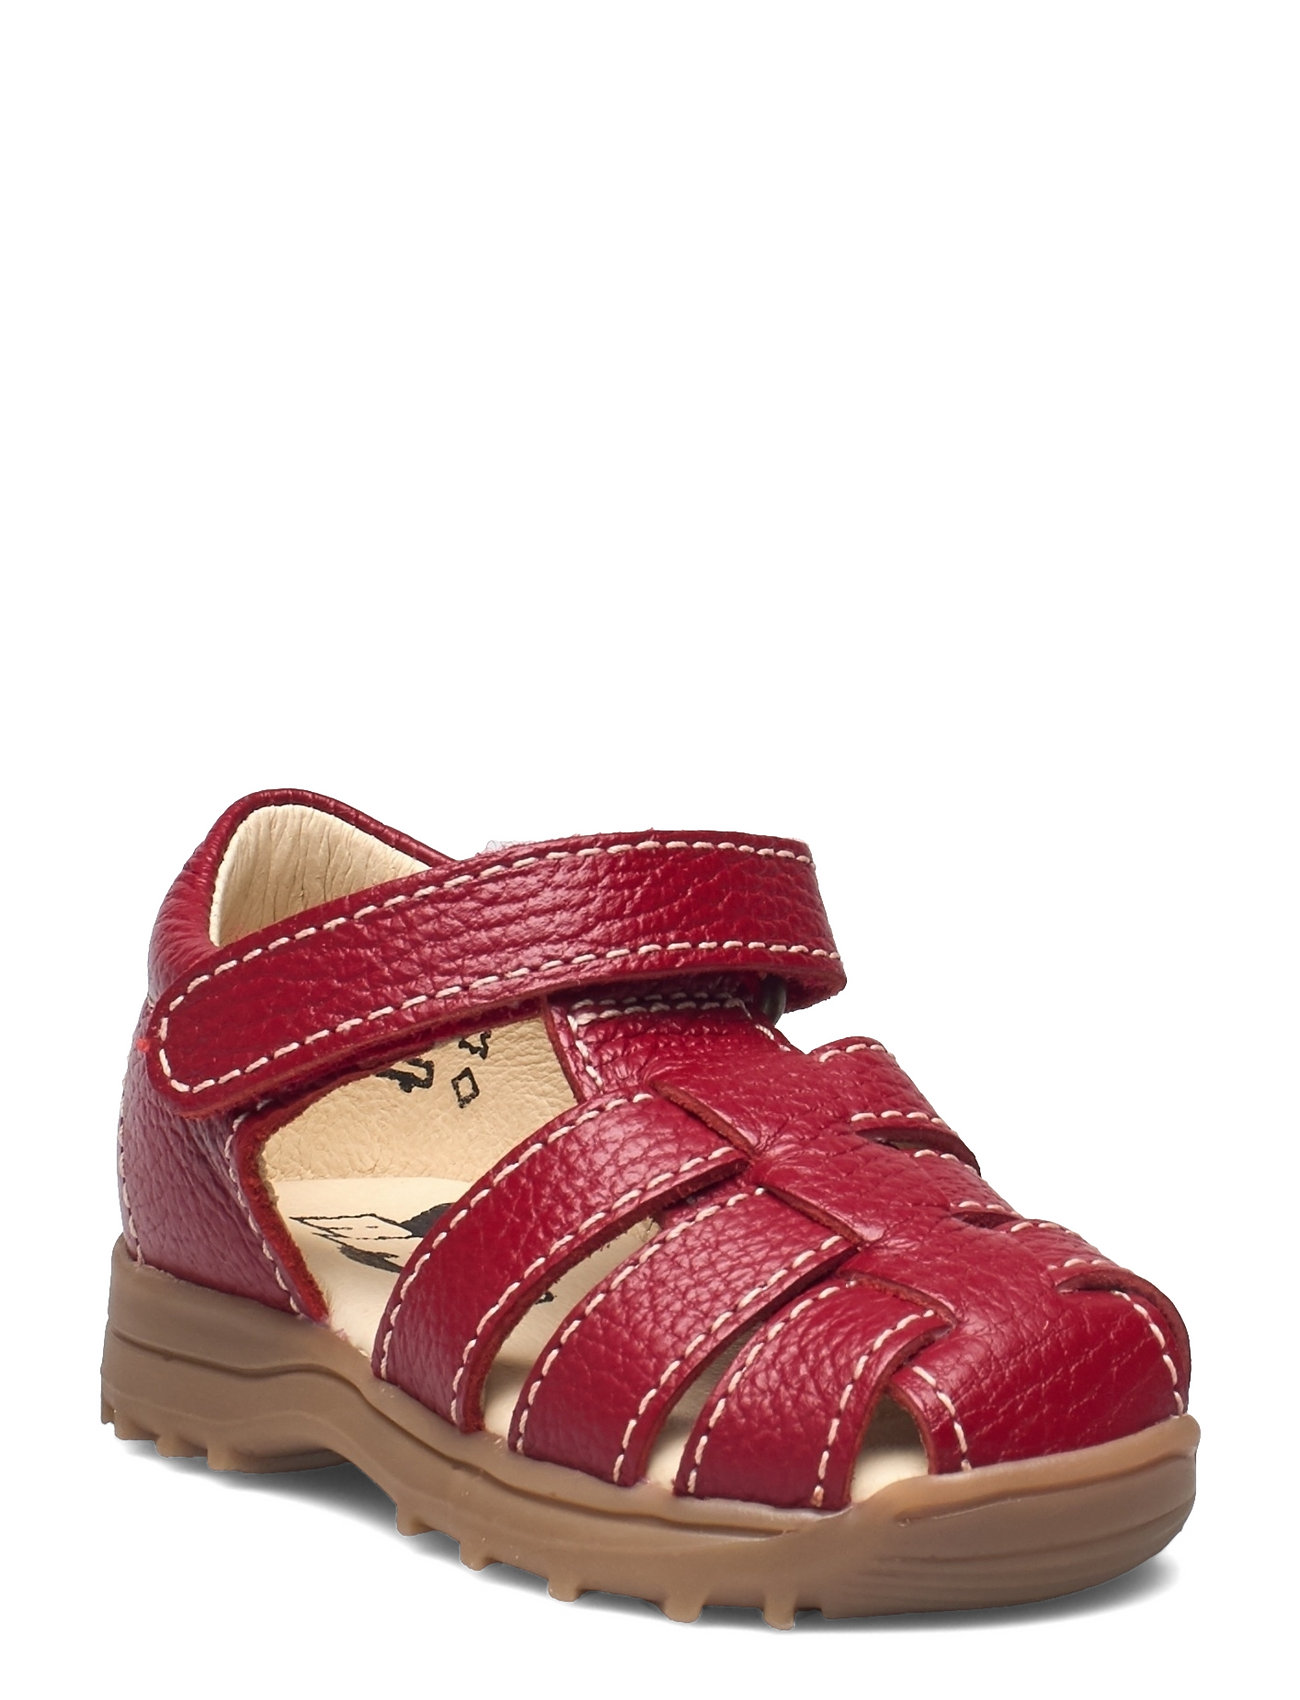 "Hand Made Sandal Shoes Summer Shoes Sandals Red Arauto RAP"